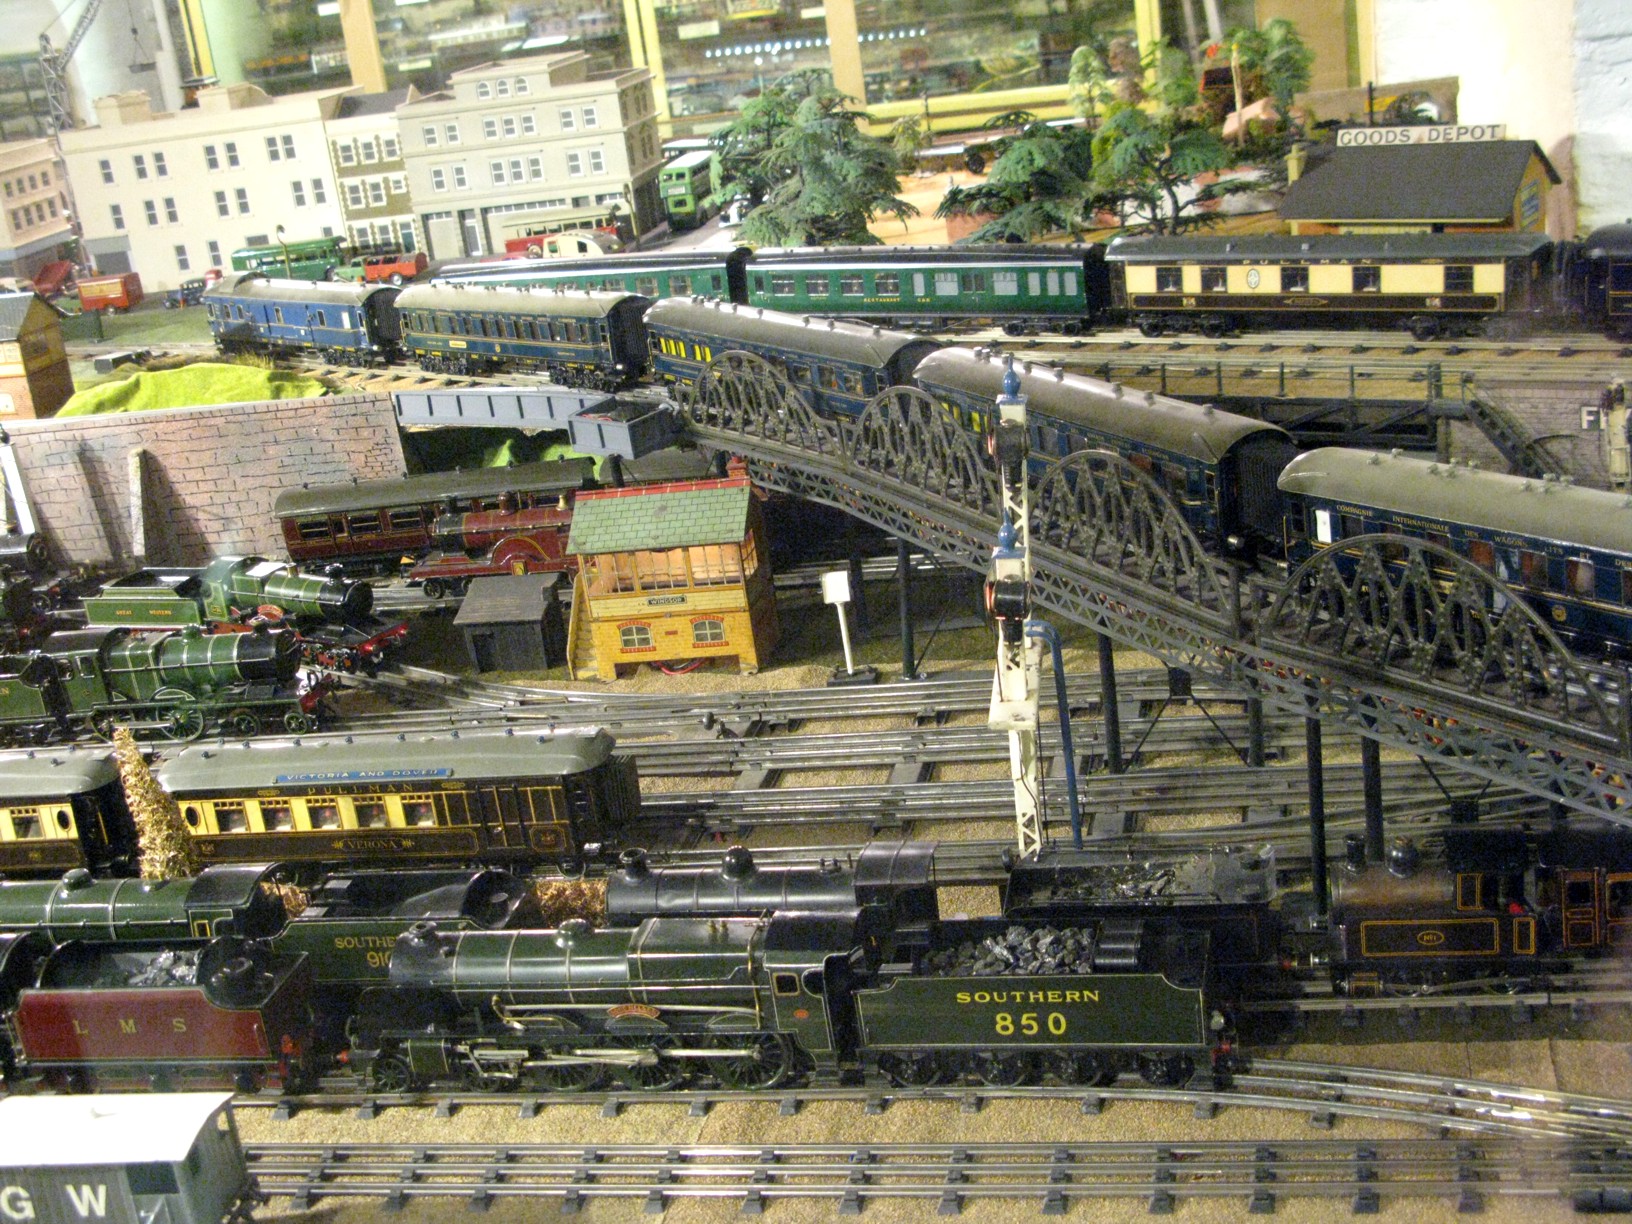 Classic railway collections from Bing, Marklin,Bassett-Lowke and more